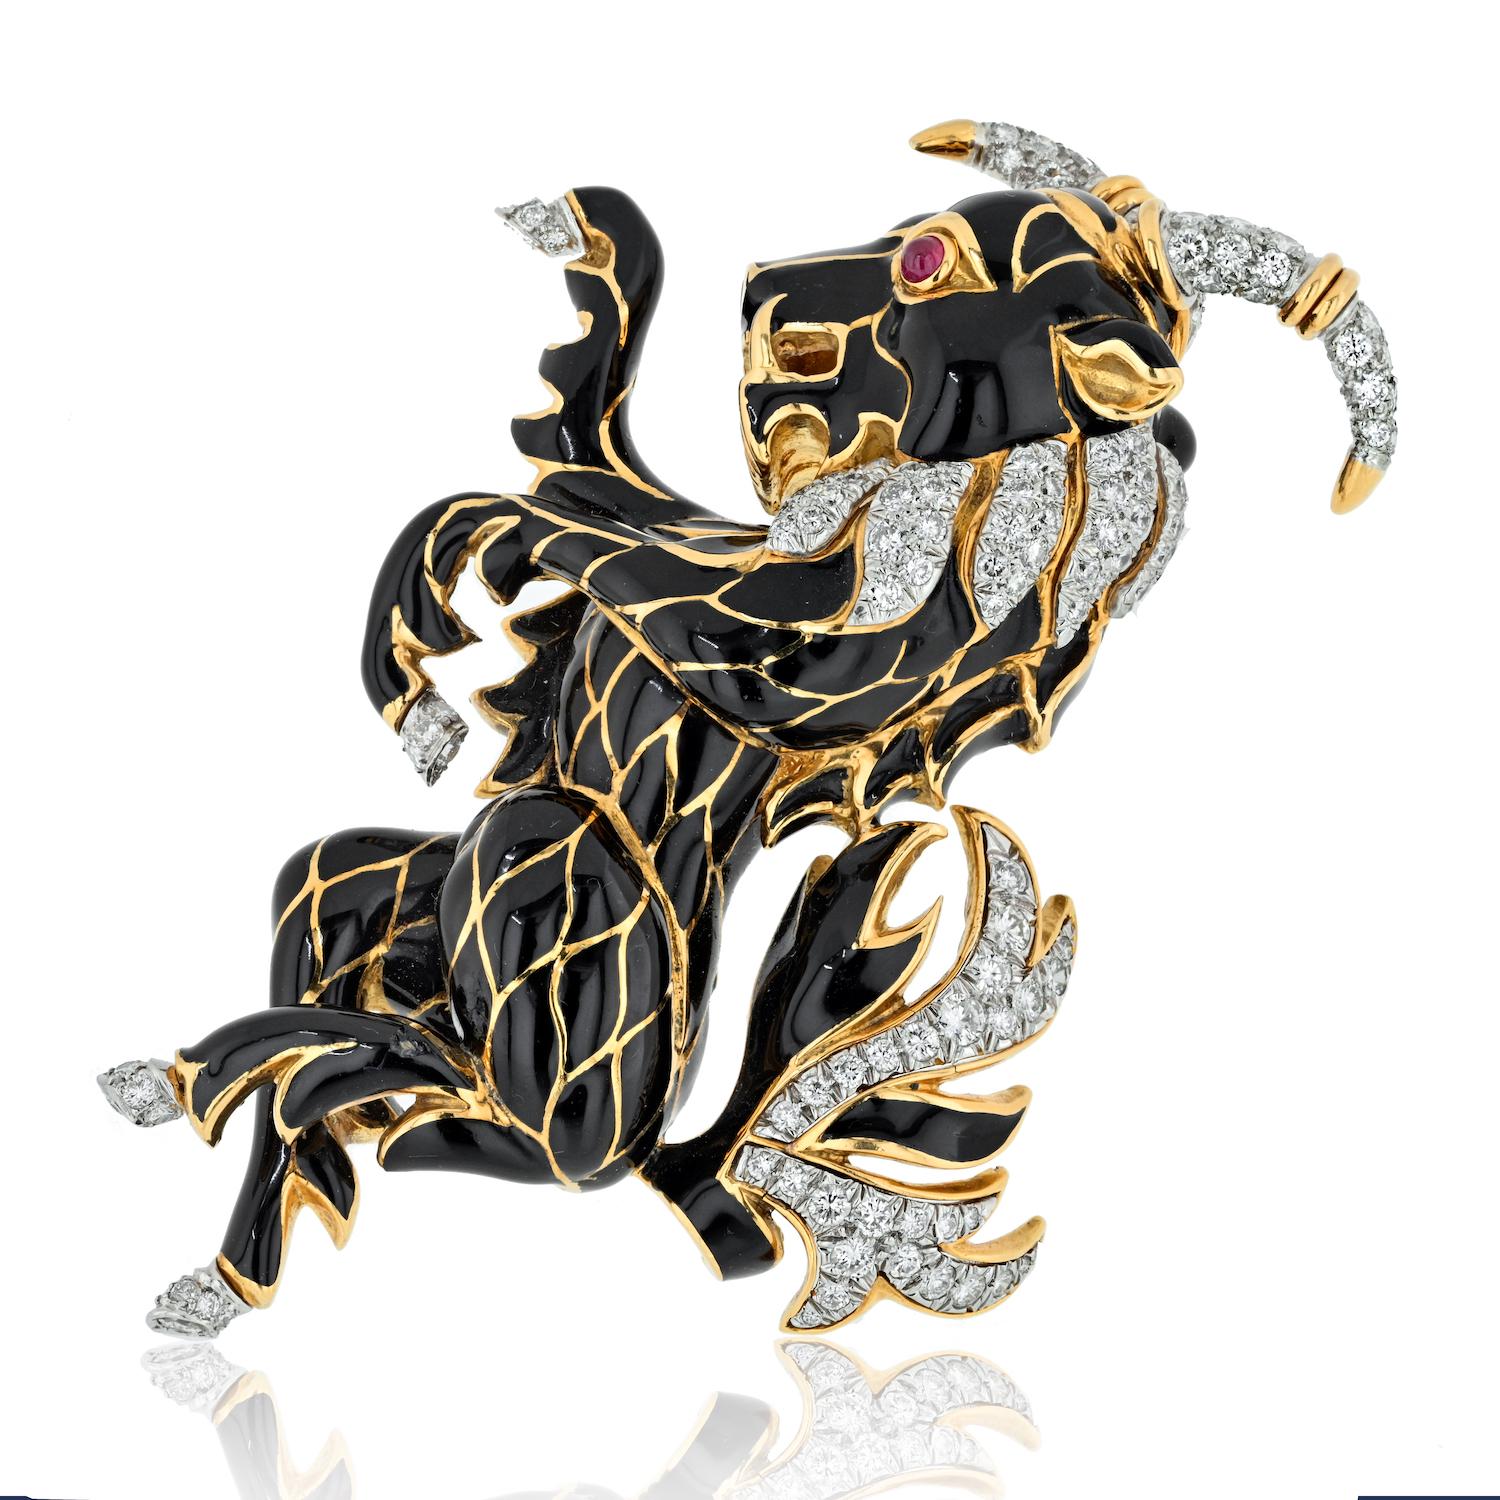 Immerse yourself in the enchanting world of David Webb with this whimsical black enamel and diamond brooch featuring a charming ram or goat design. Crafted in 18K yellow gold and platinum, this brooch is a true testament to Webb's iconic style and